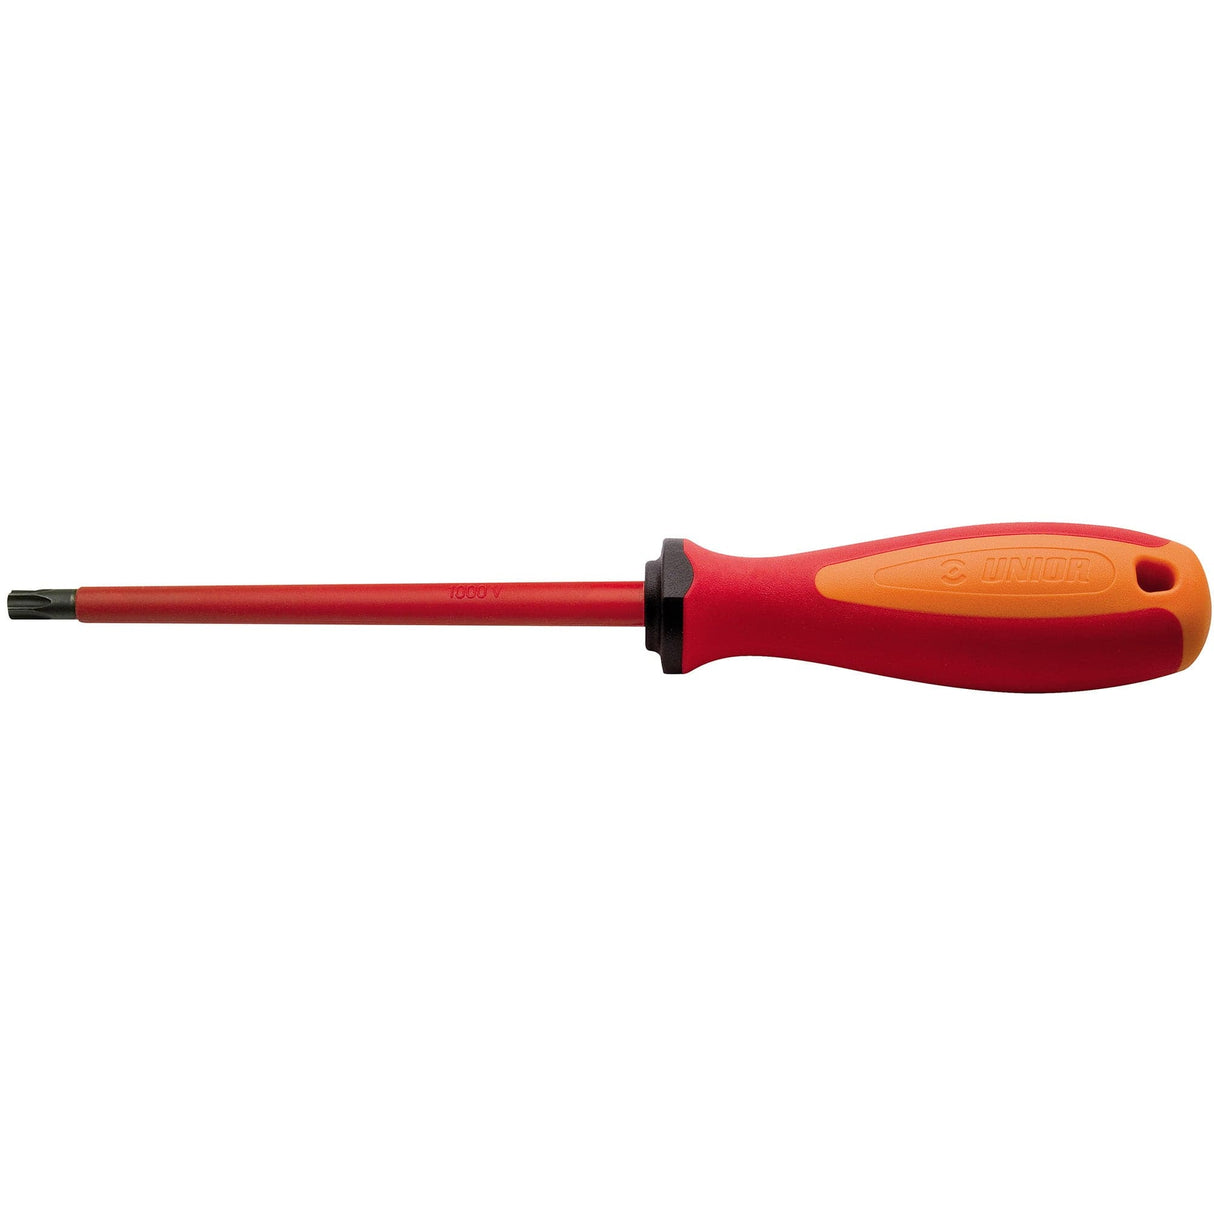 Unior Screwdriver Tbi With Tx Profile And Hole: Red Tr 25